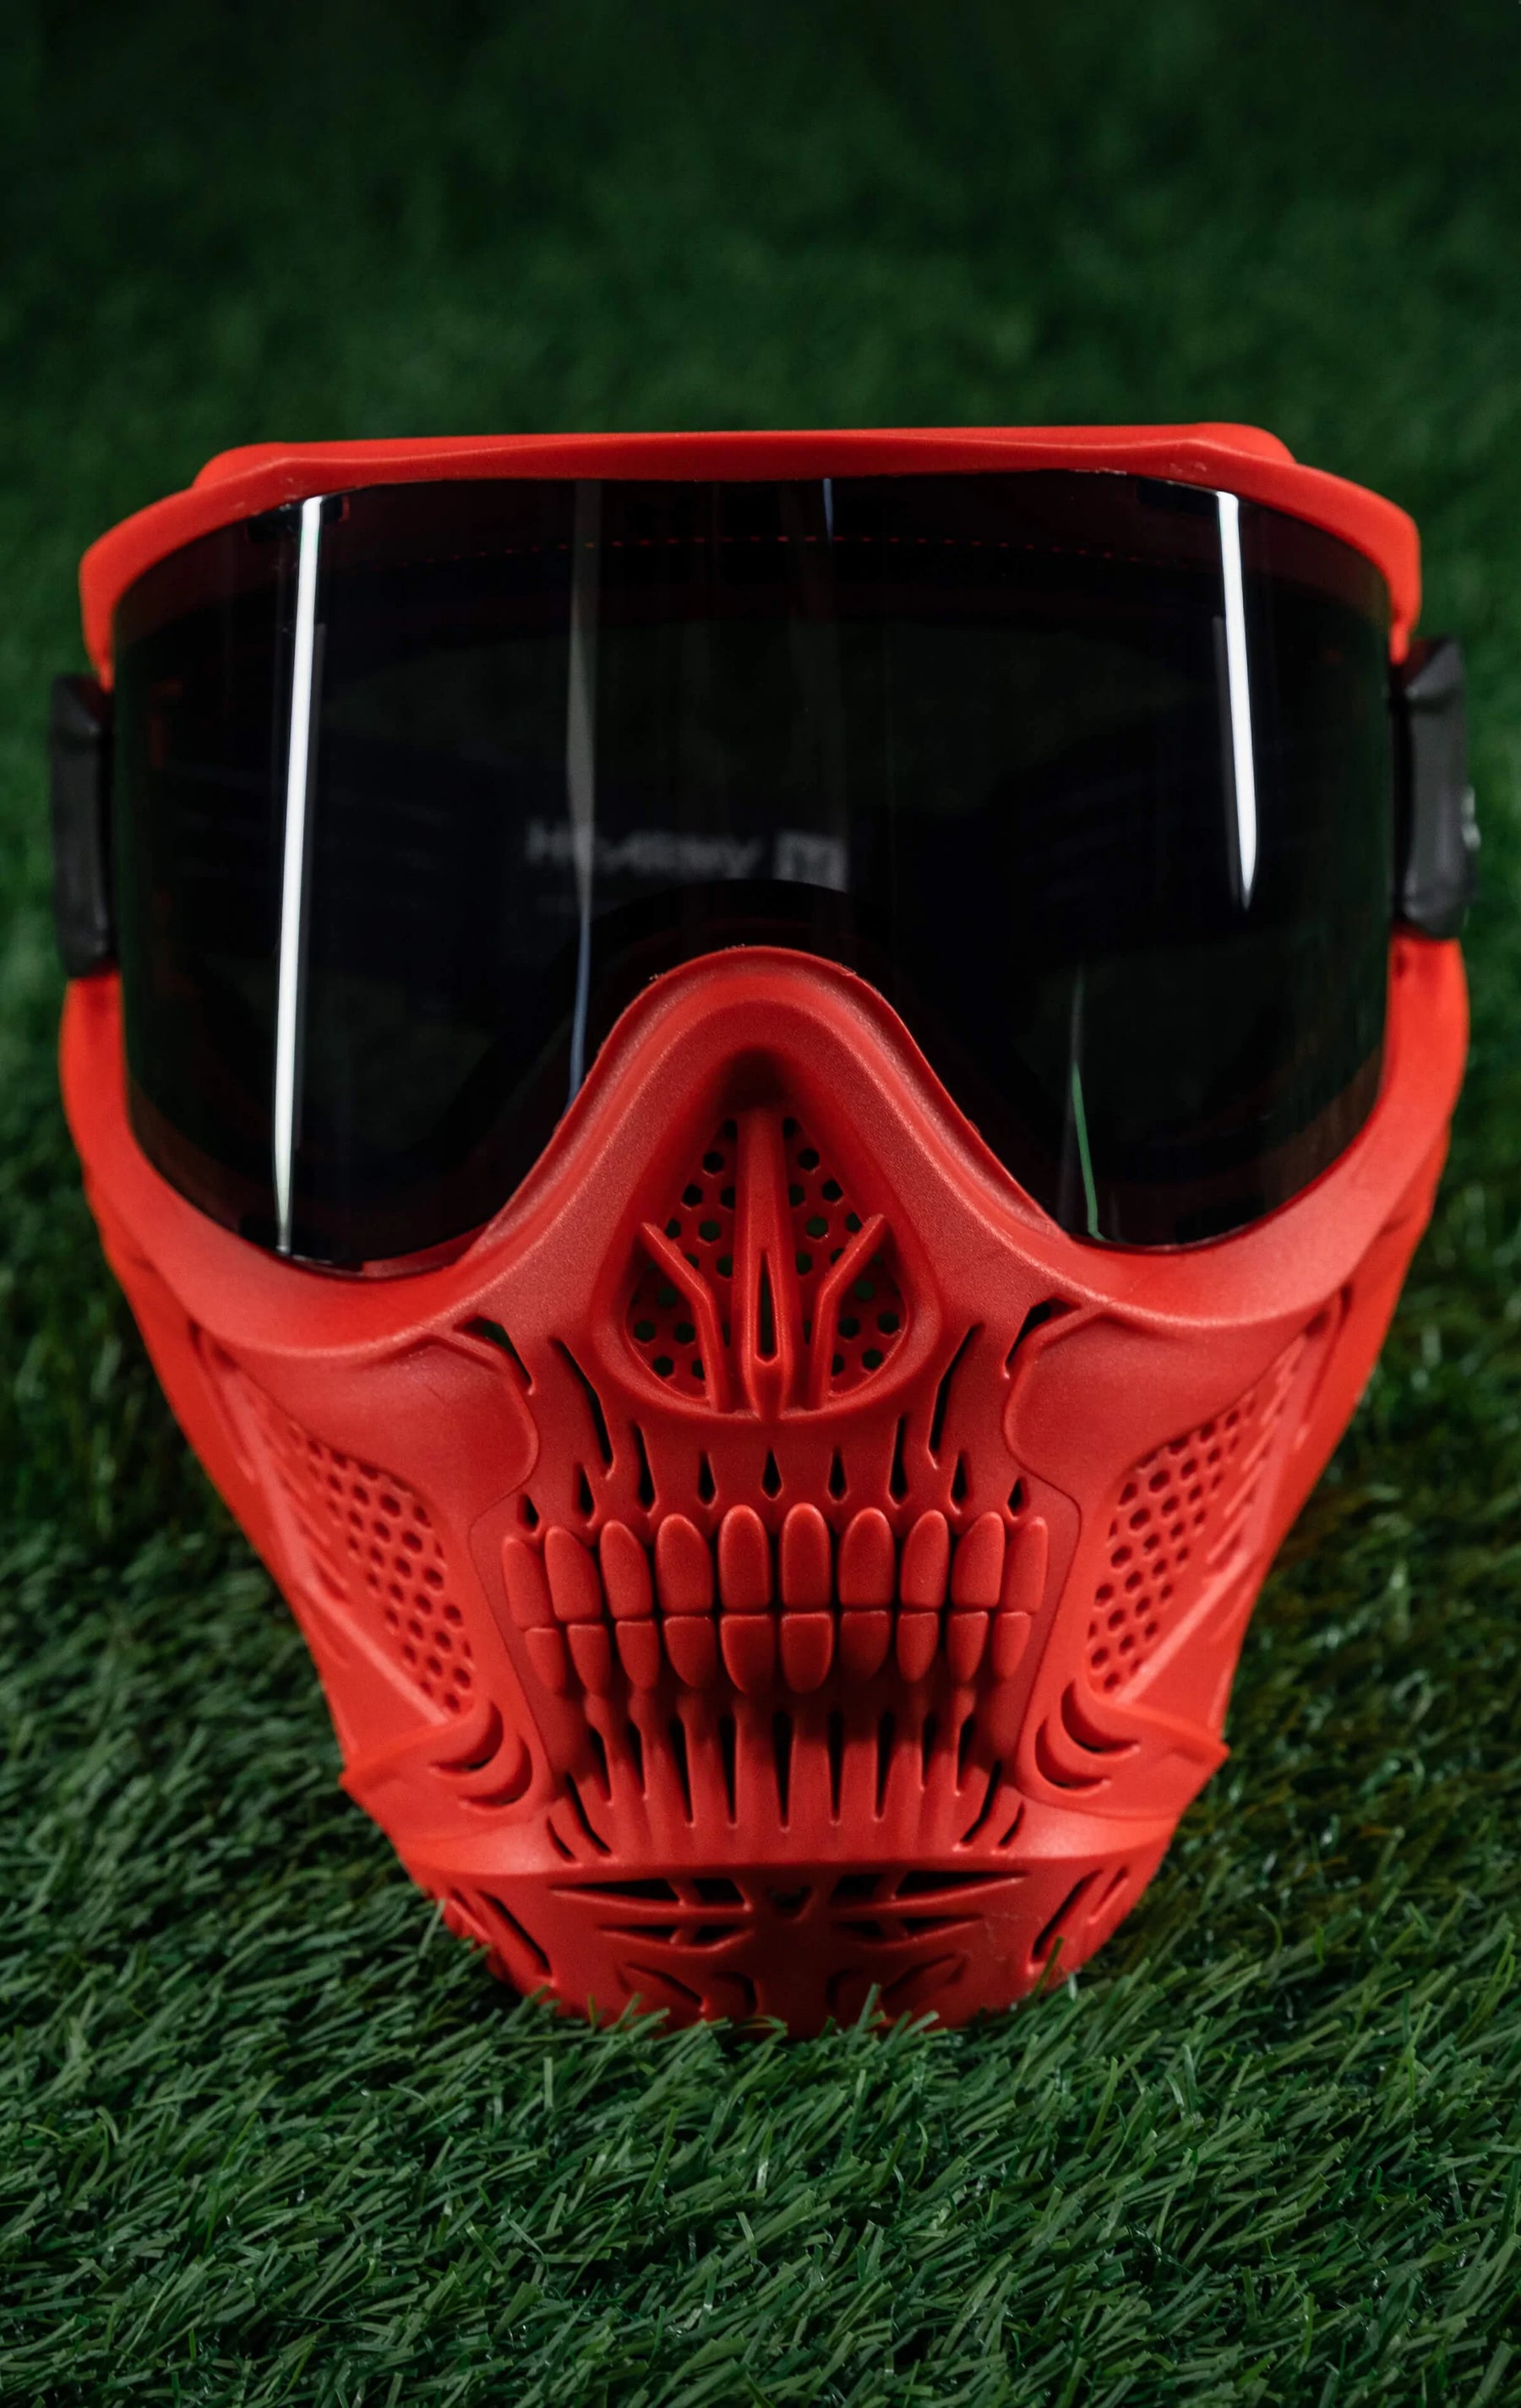 Hstl Skull Goggle "Sinner" - Red W/ Smoke Lens | Paintball Goggle | Mask | Hk Army